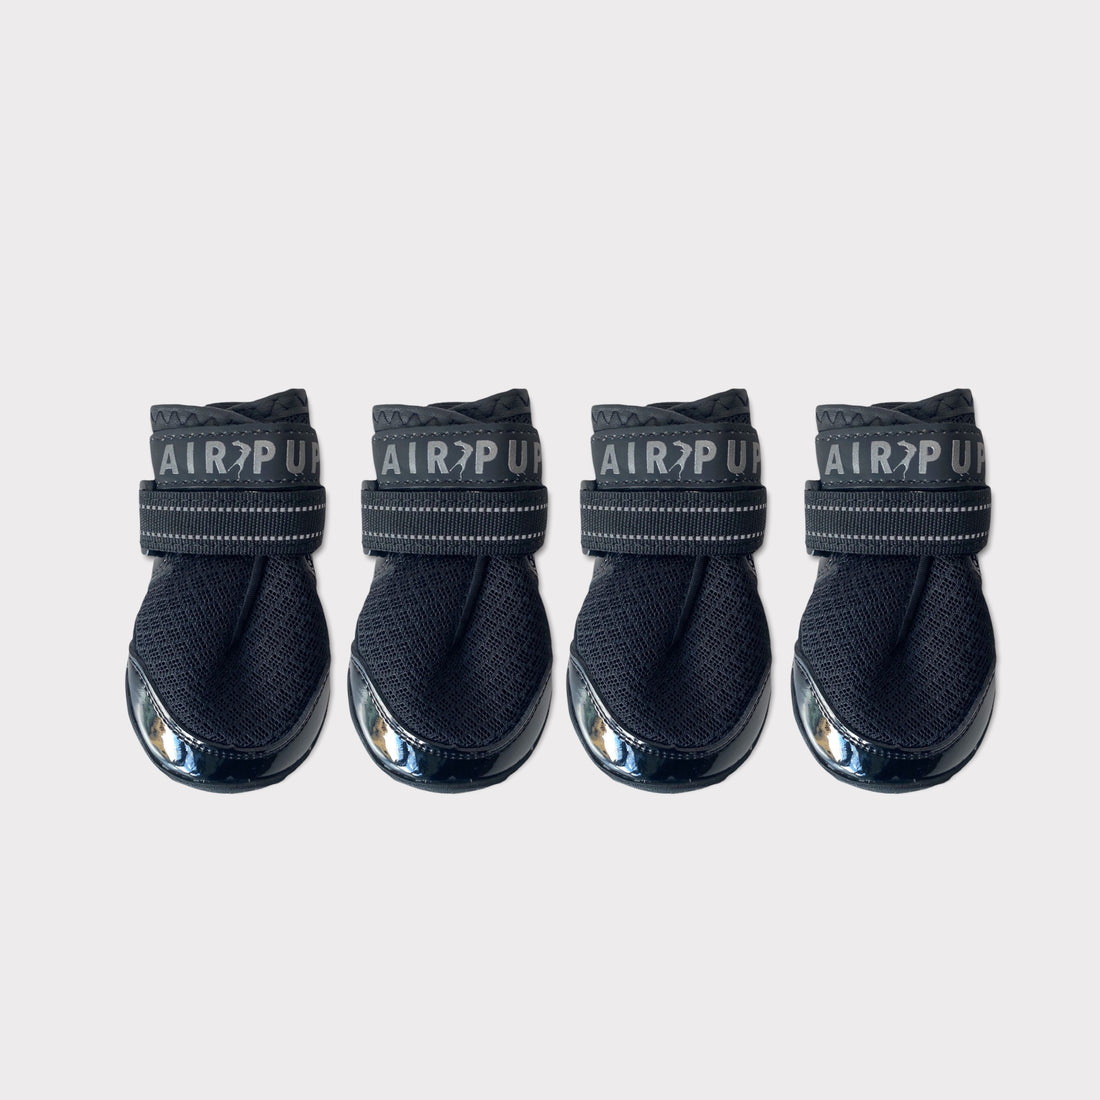 AIR PUP 1 REFLECTIVE BLACK - DOG SHOES / BOOTS - SET OF 4